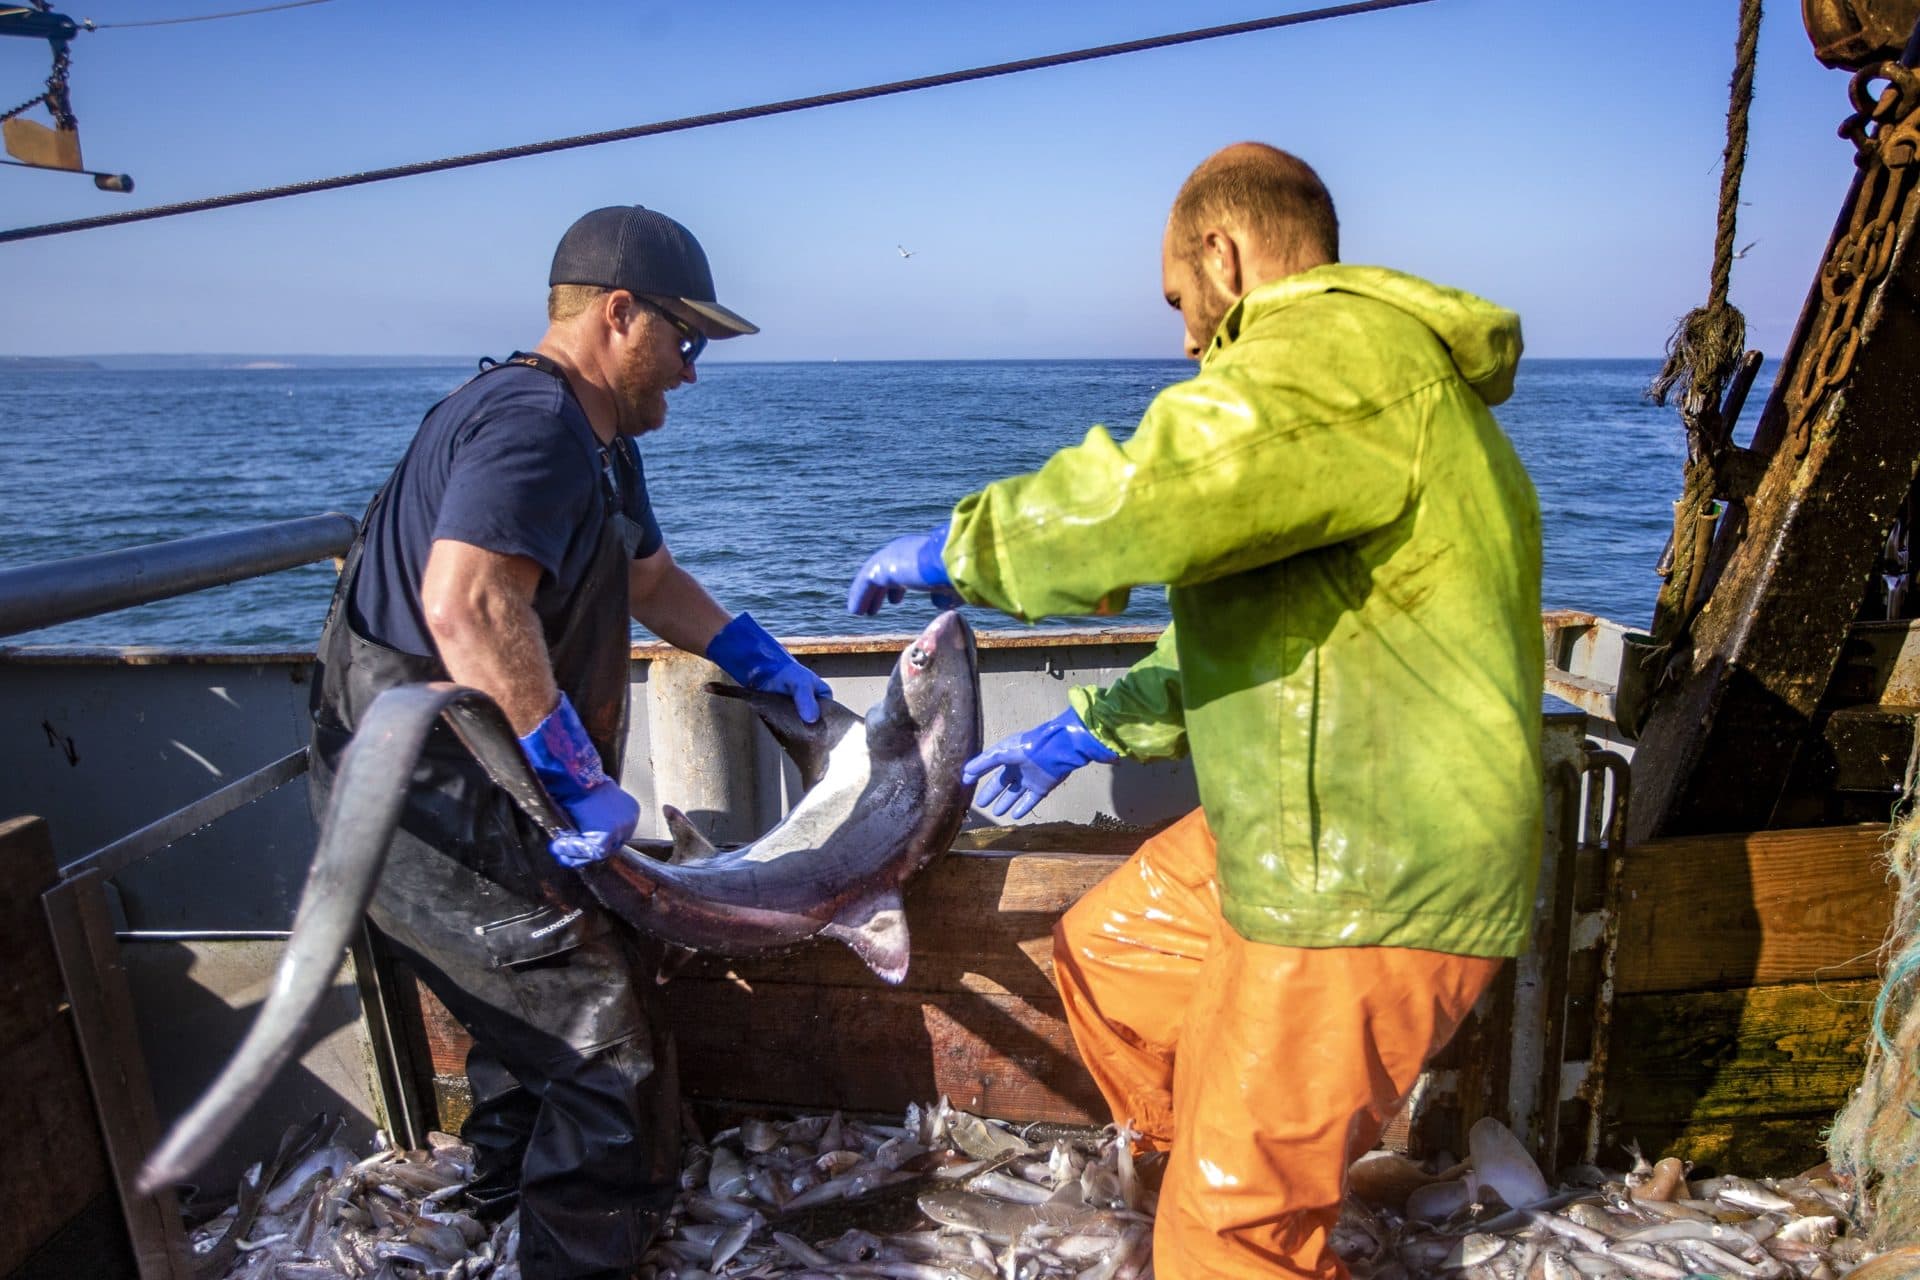 Fishermen Jamey McGroarty, left, and Rocco Raspa wrestle with a thresher shark that was caught in the net to throw it overboard. (Jesse Costa/WBUR)